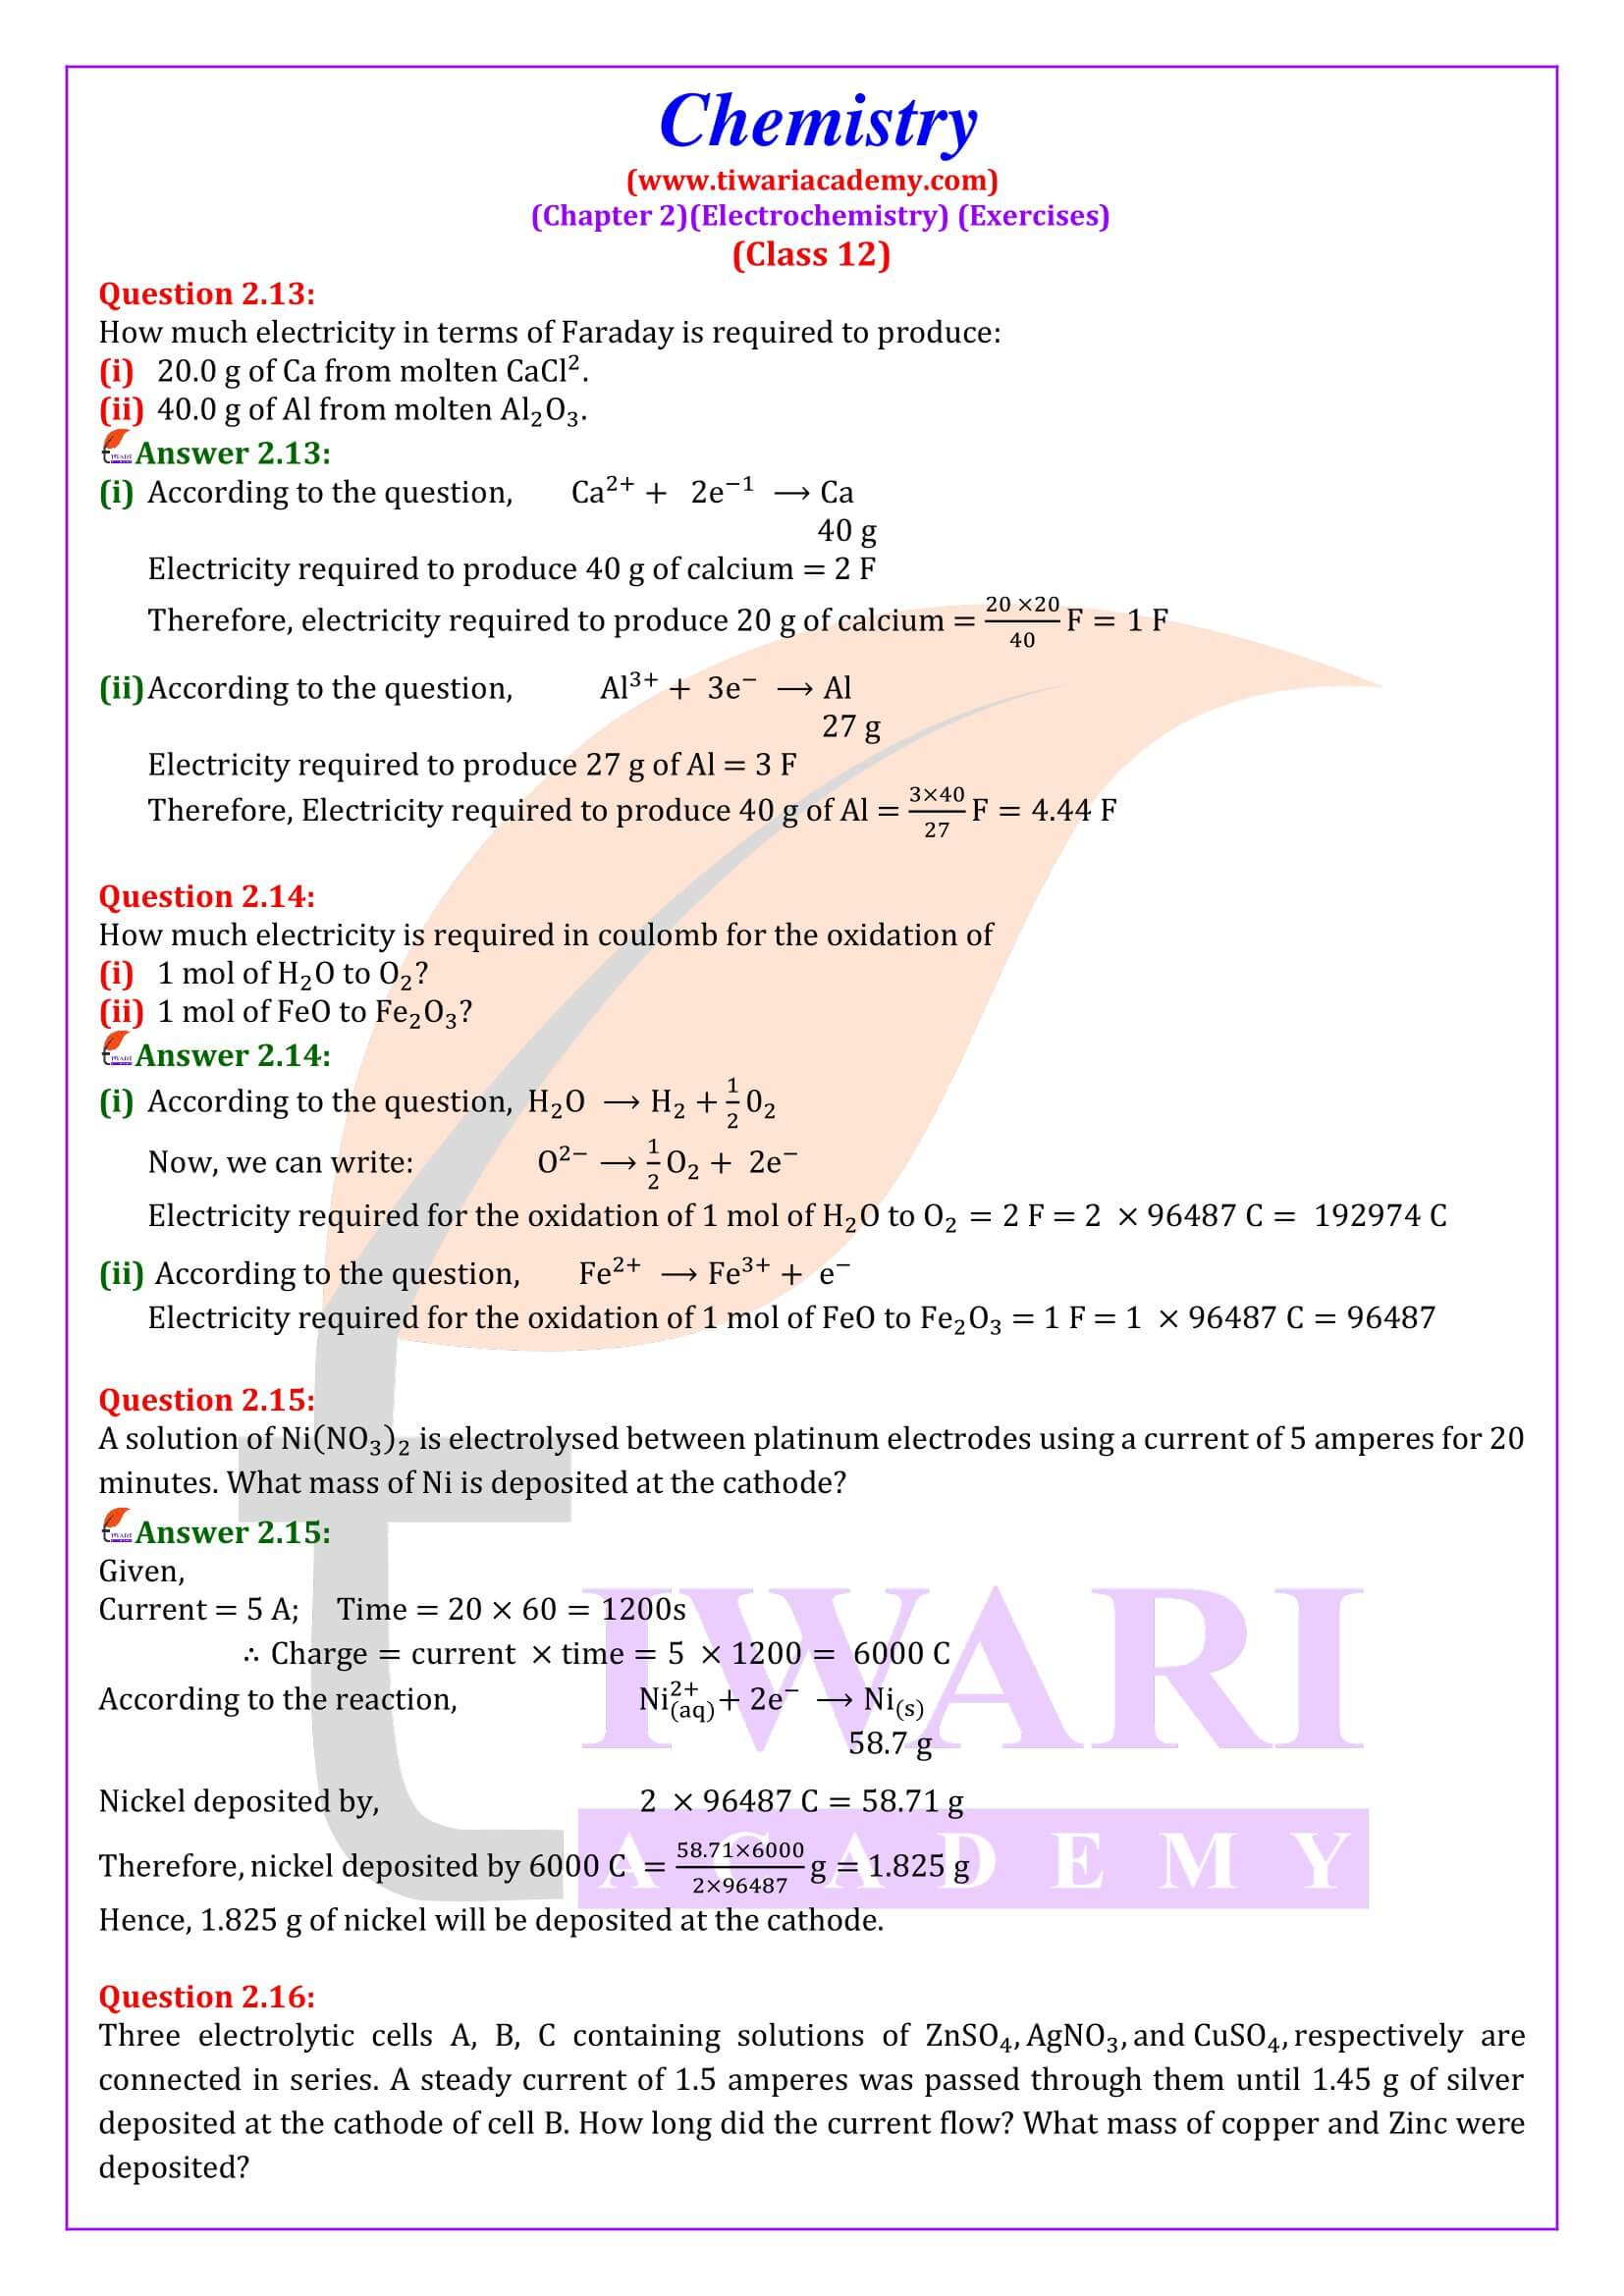 NCERT Solutions for Class 12 Chemistry Chapter 2 Exercises answers